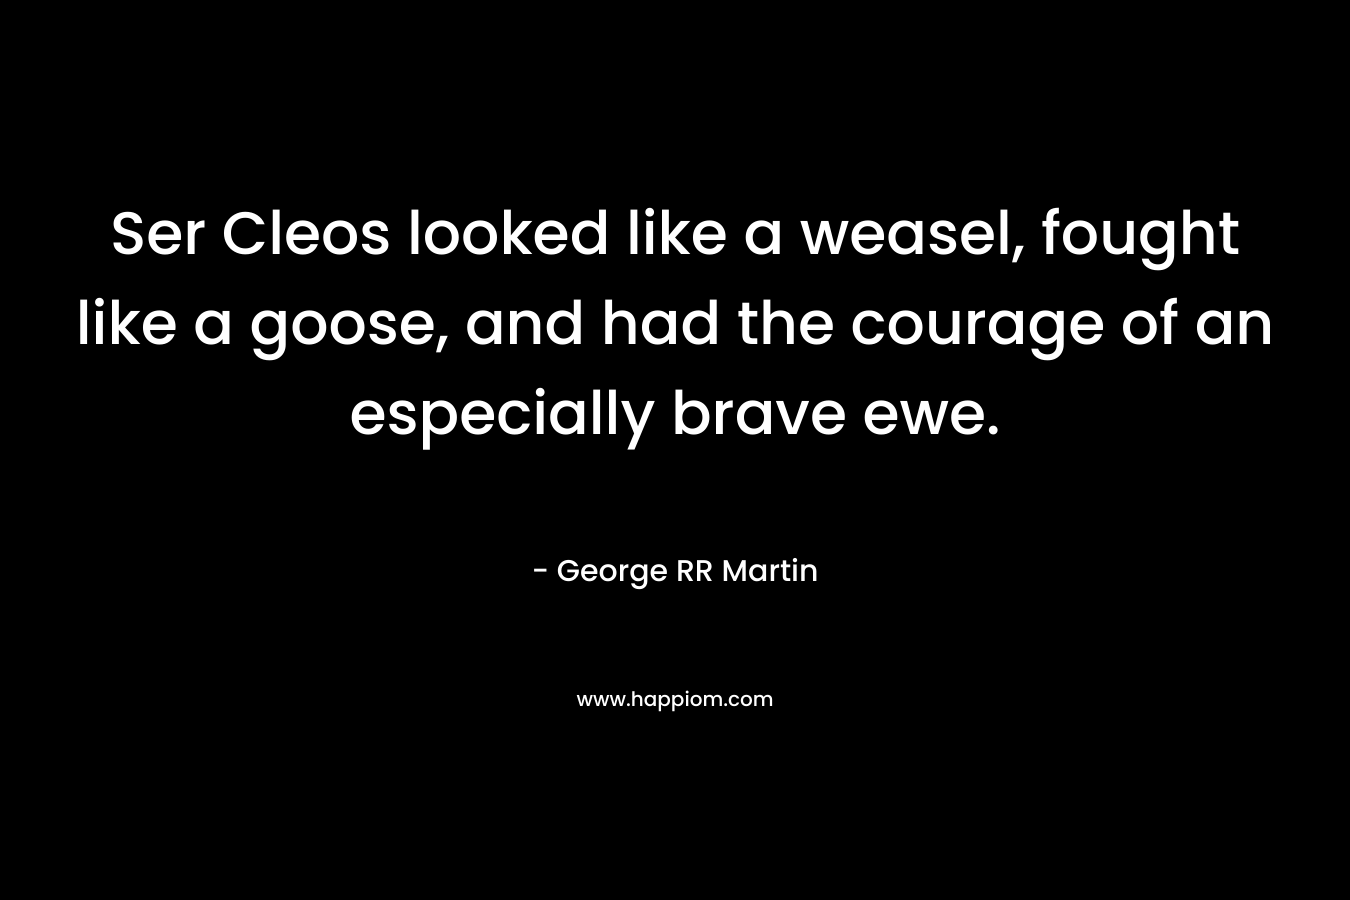 Ser Cleos looked like a weasel, fought like a goose, and had the courage of an especially brave ewe. – George RR Martin